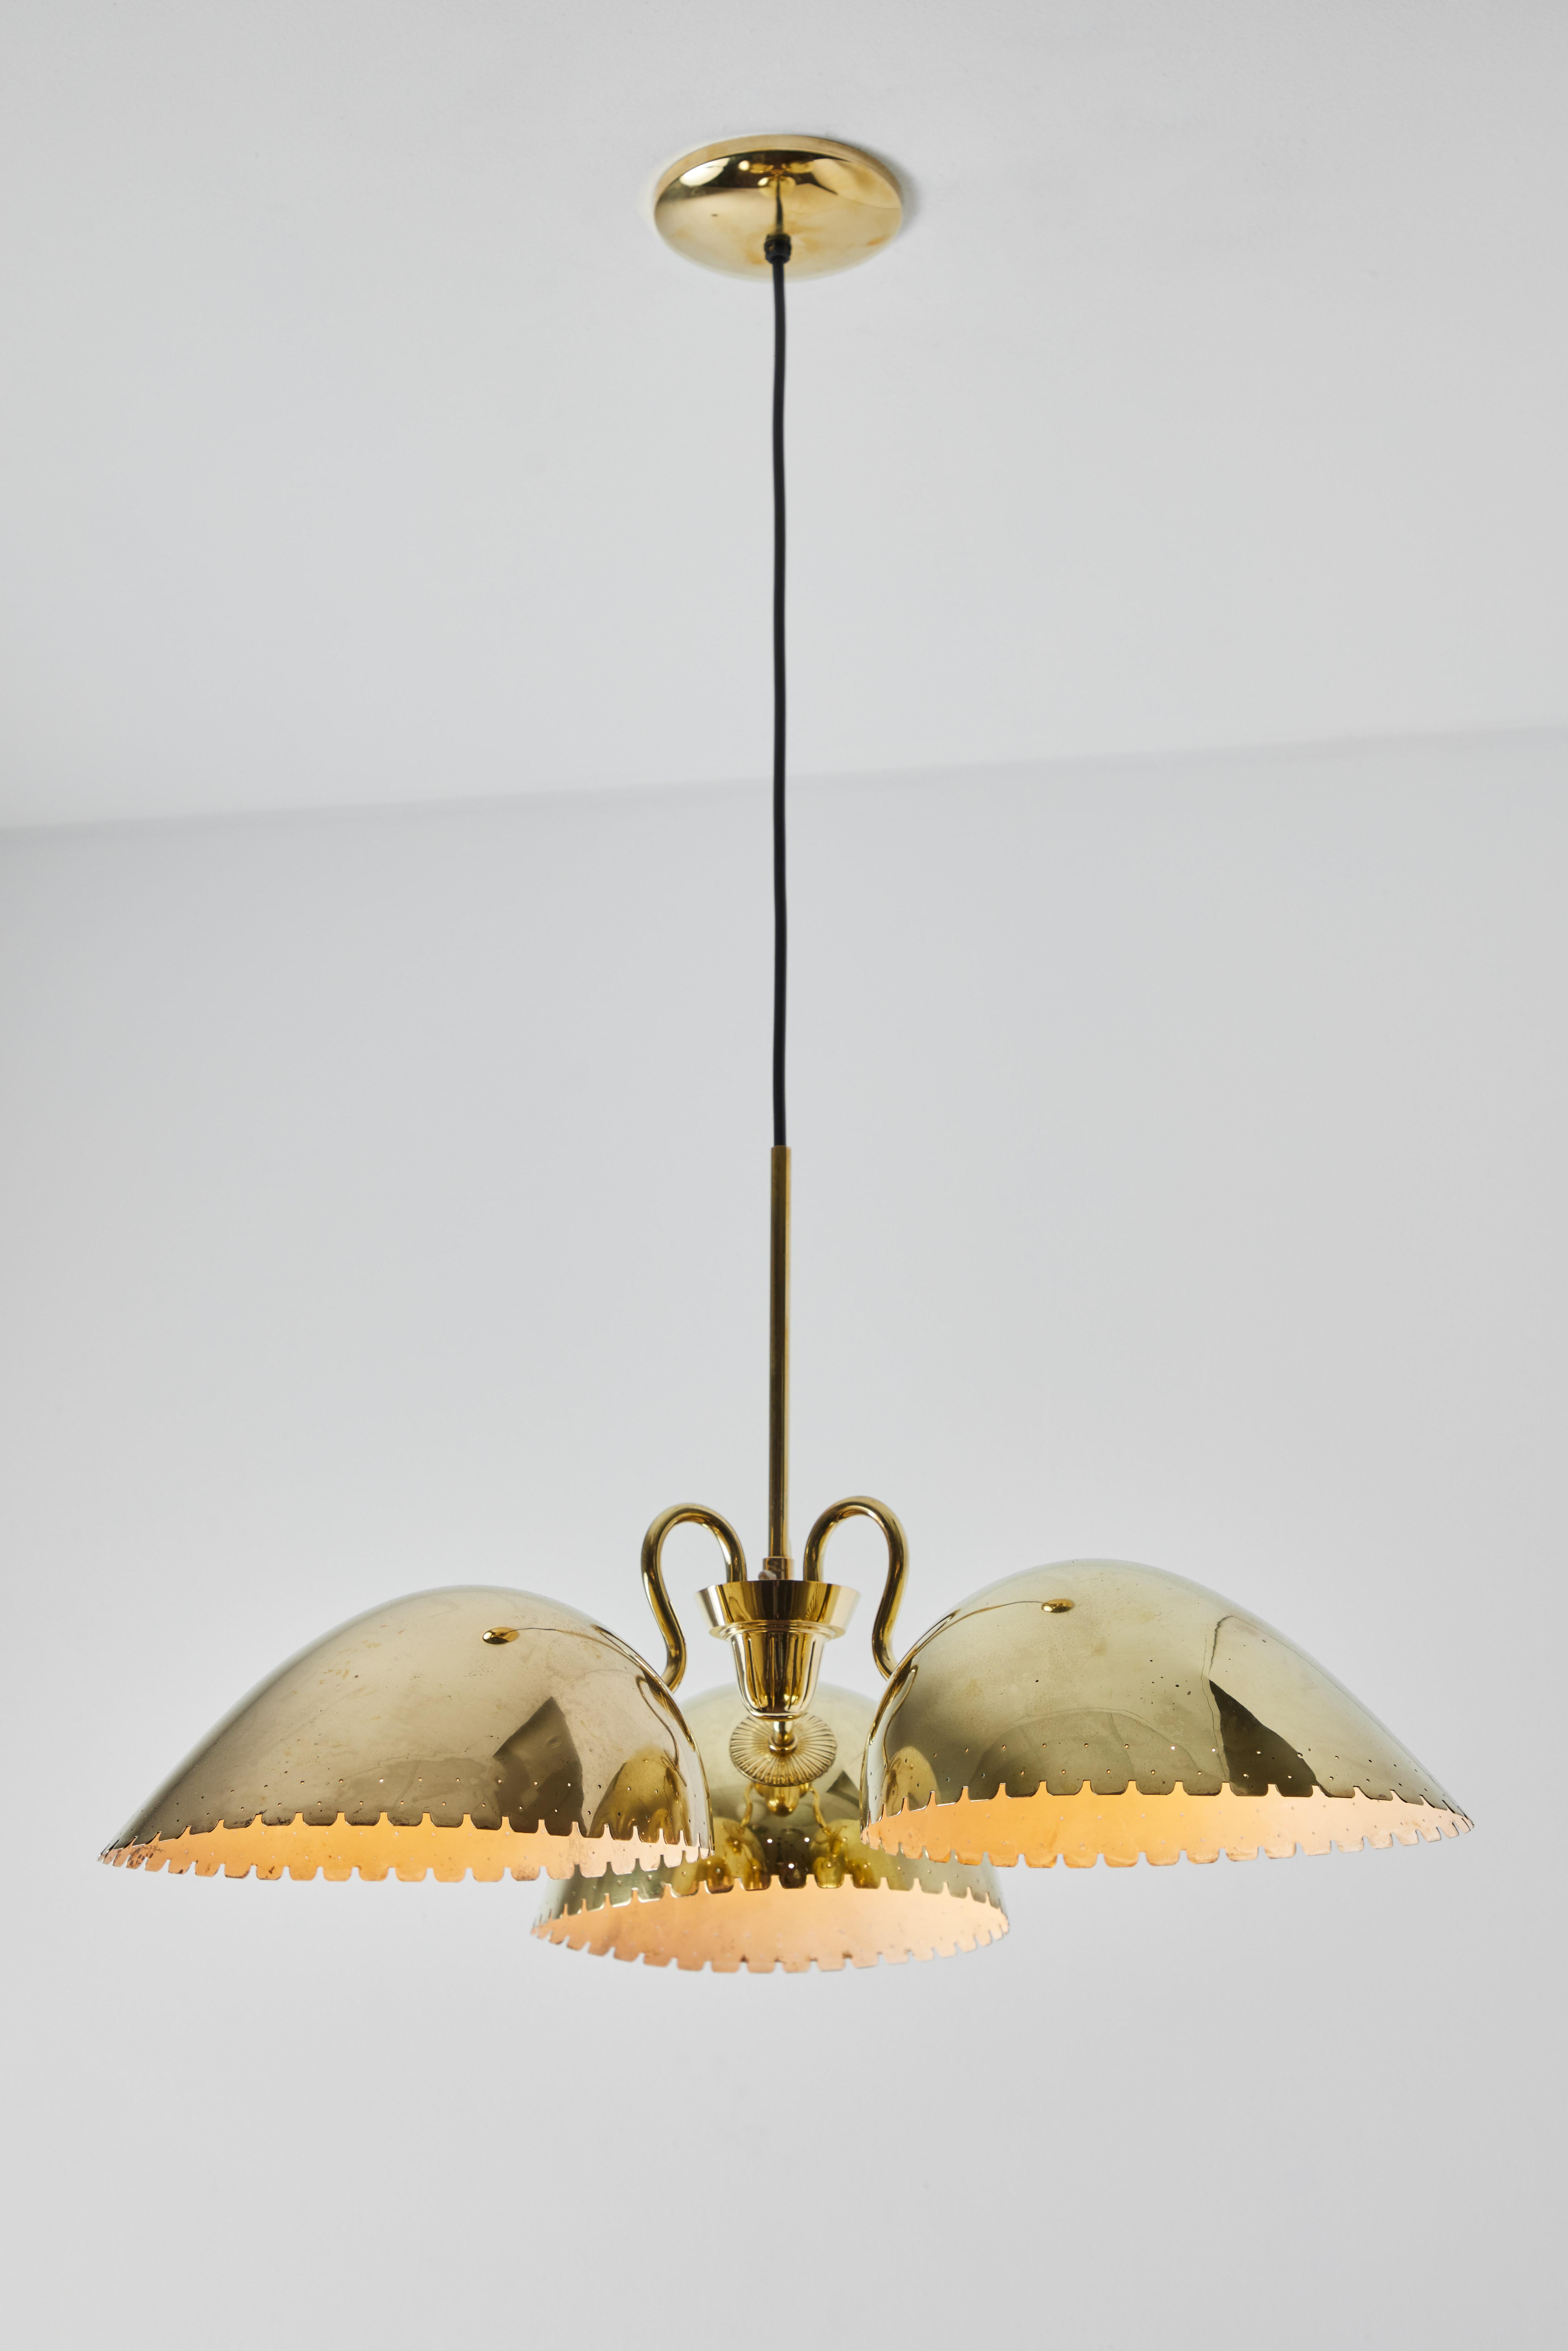 1940s Carl-Axel Acking Perforated Brass chandelier for Böhlmarks. Produced by the iconic Swedish lamp maker circa 1940 and executed in perforated brass. Reminiscent of the early designs of Paavo Tynell for Taito Oy. An elegant chandelier with great